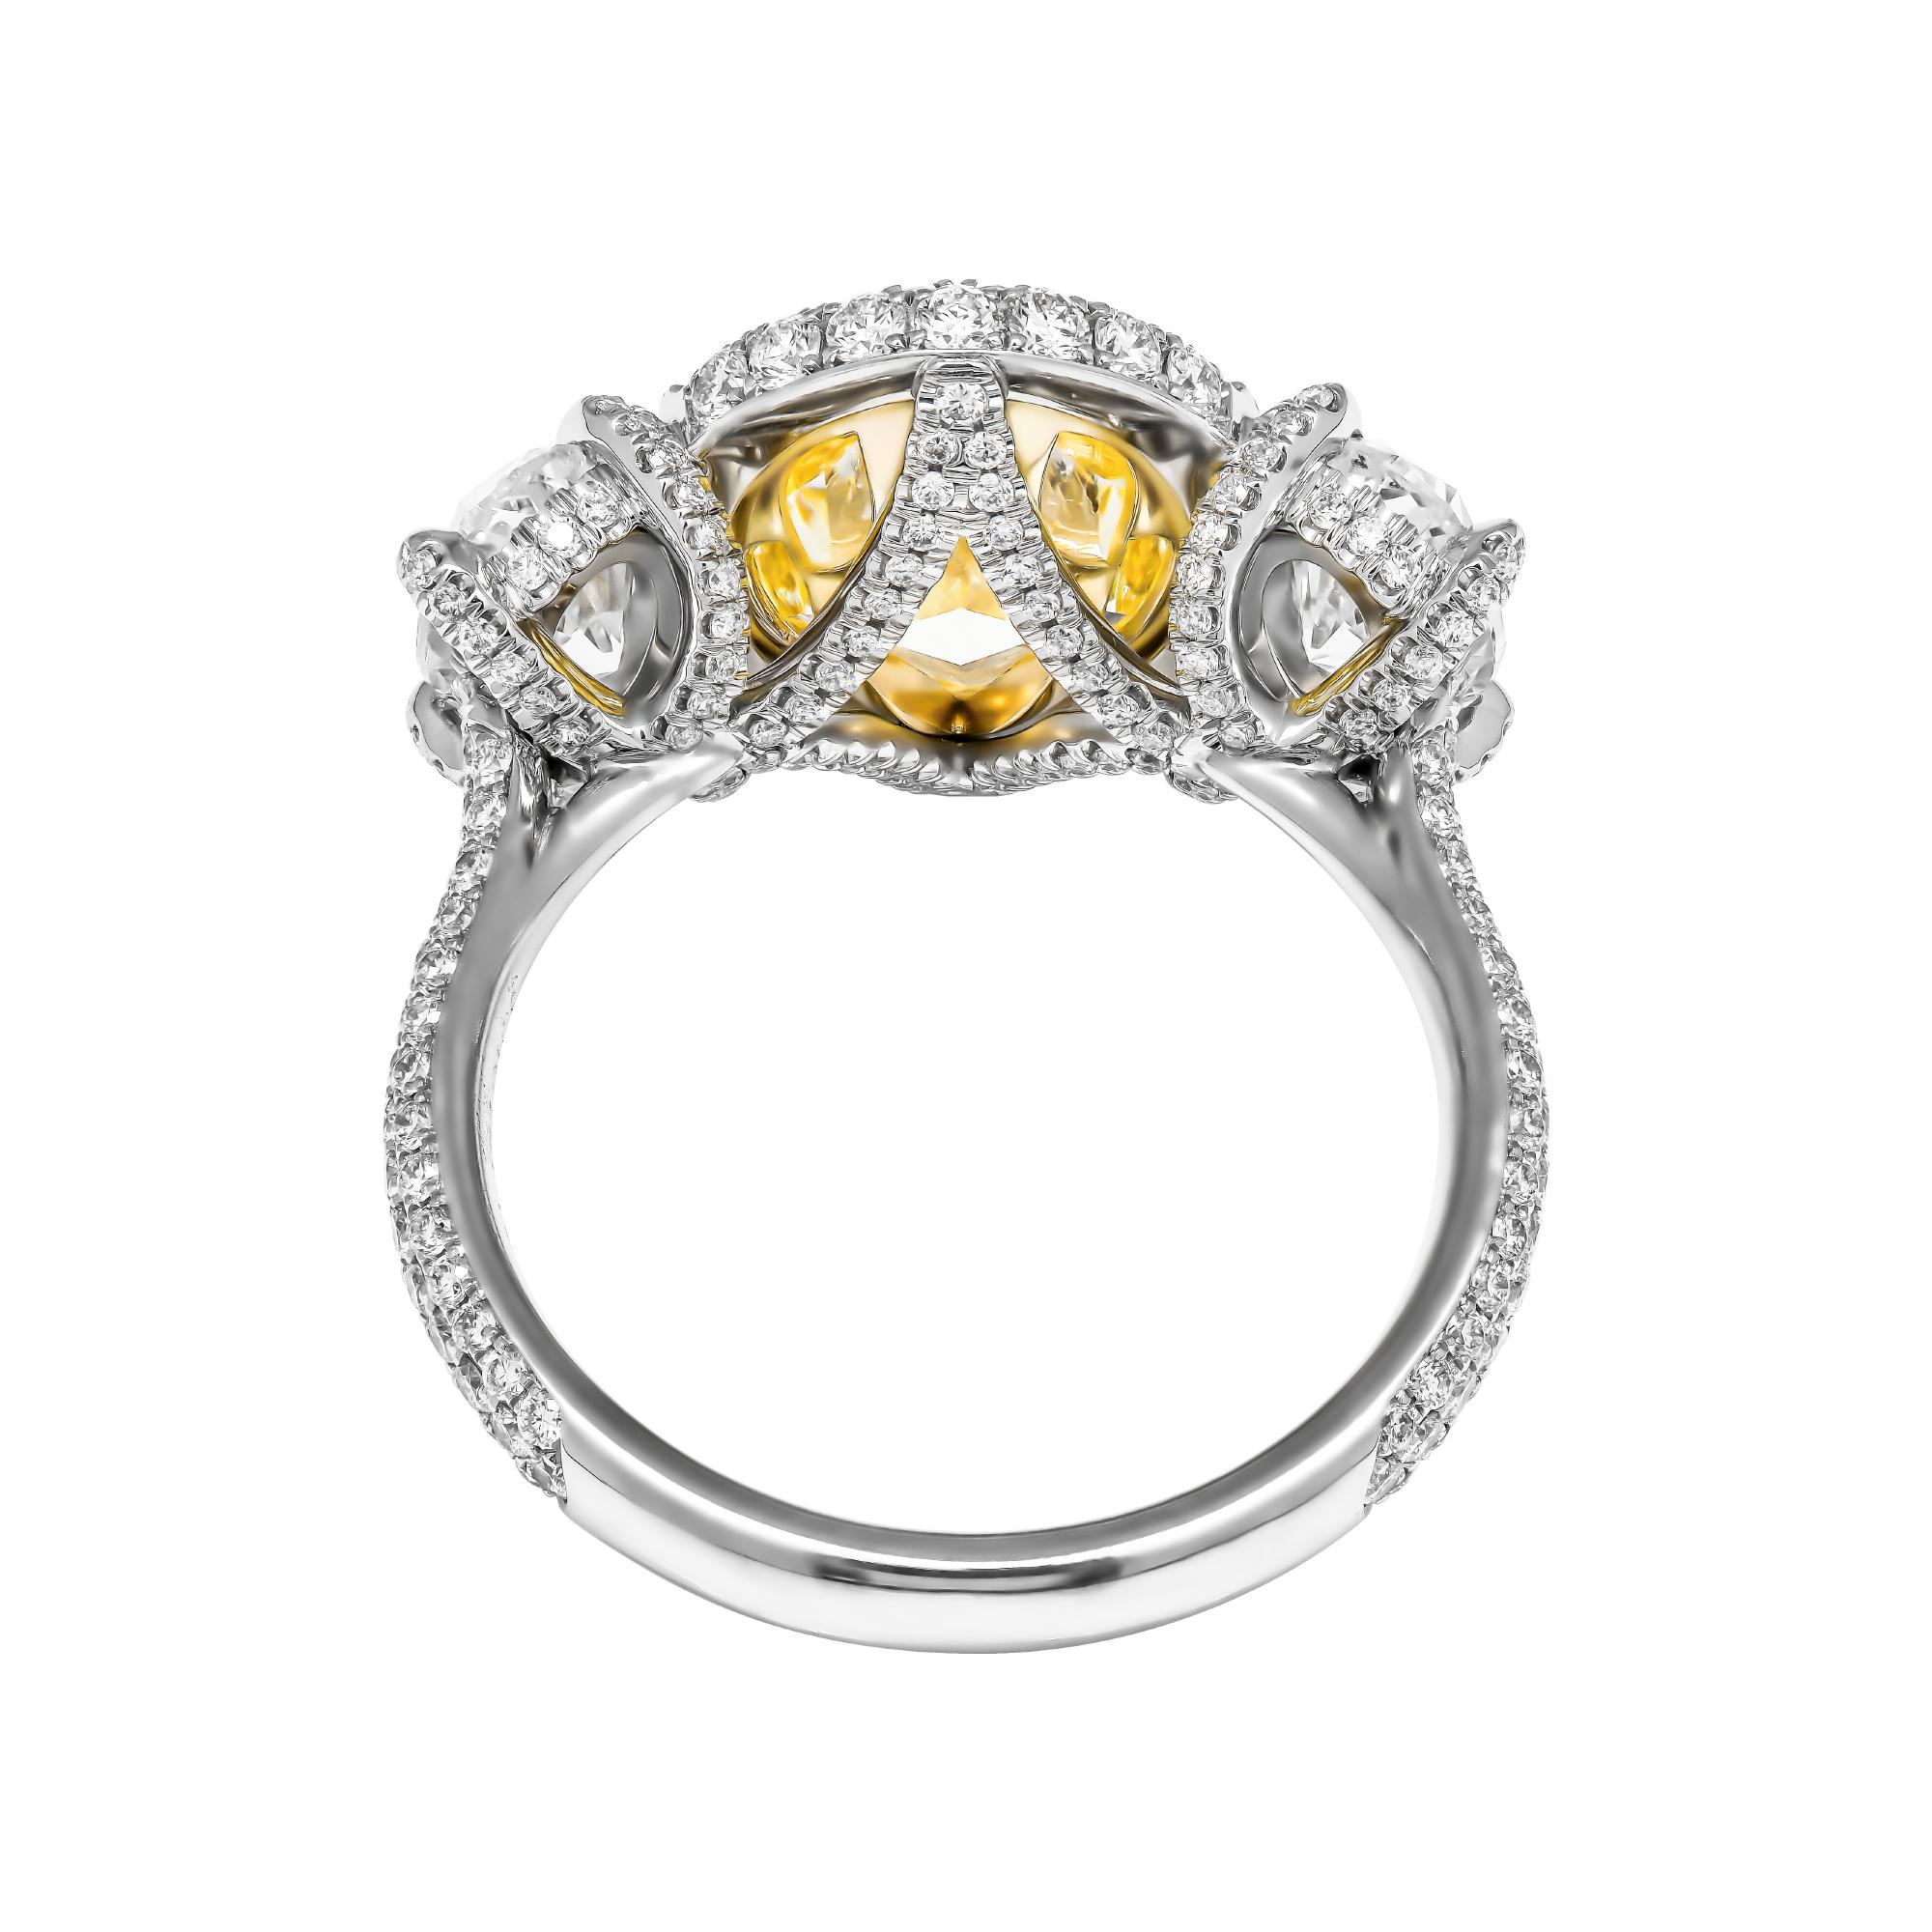 Oval Cut GIA Certifies 3-Stone Ring with 3.52 Carat Fancy Light Yellow Oval Diamond For Sale